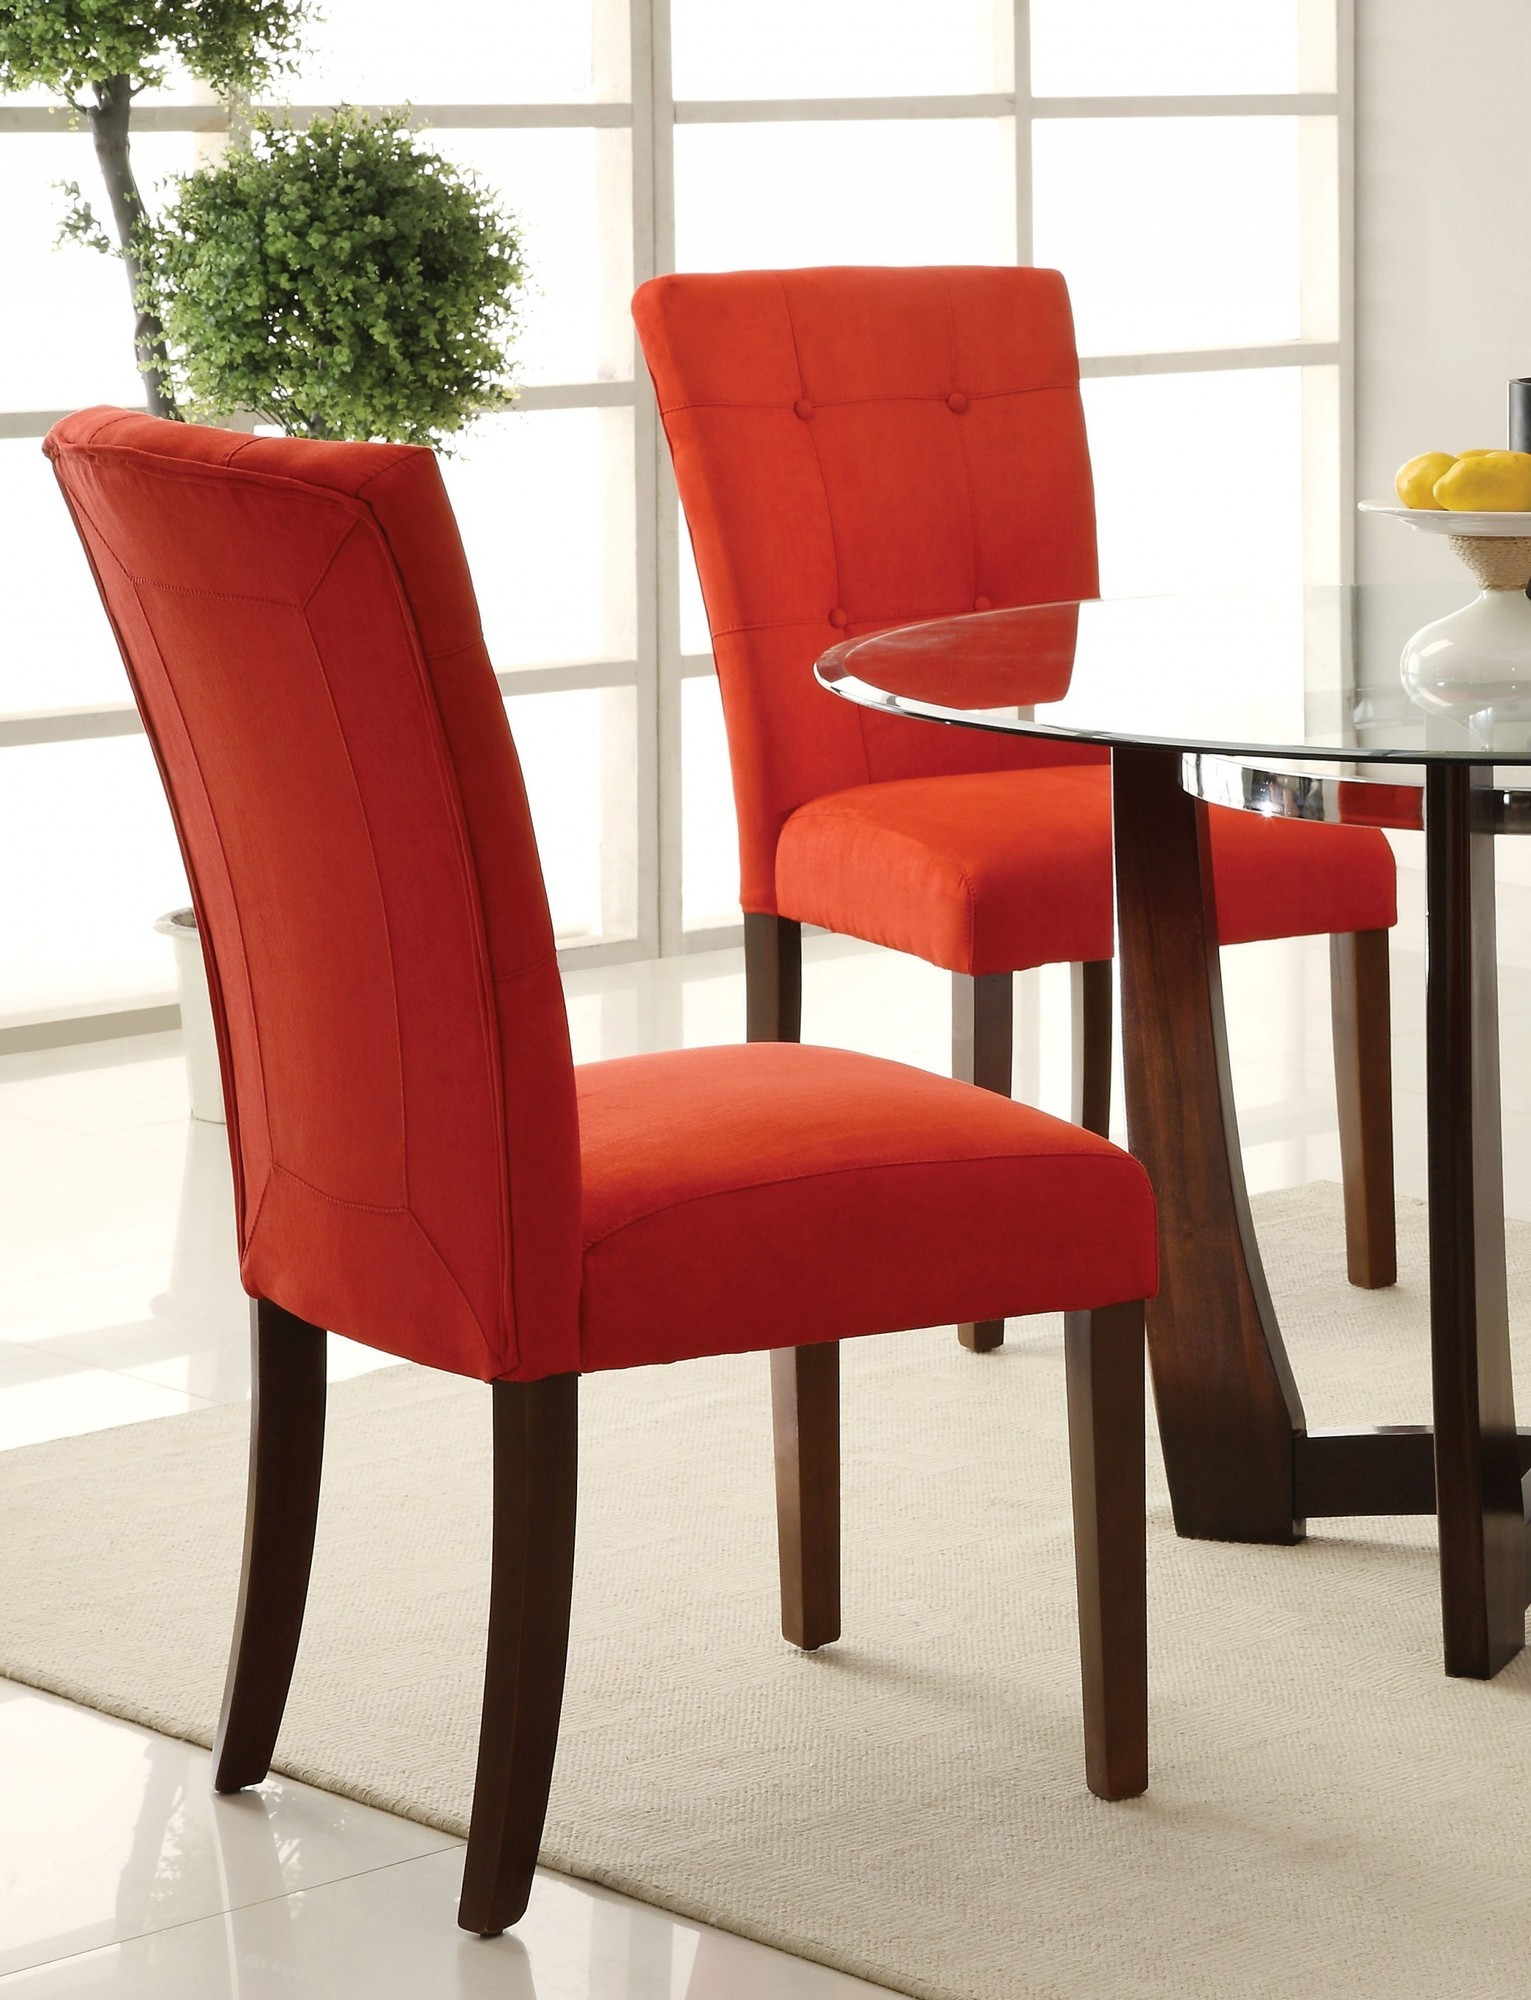 19" X 25" X 40" 2pc Red Microfiber And Walnut Side Chair